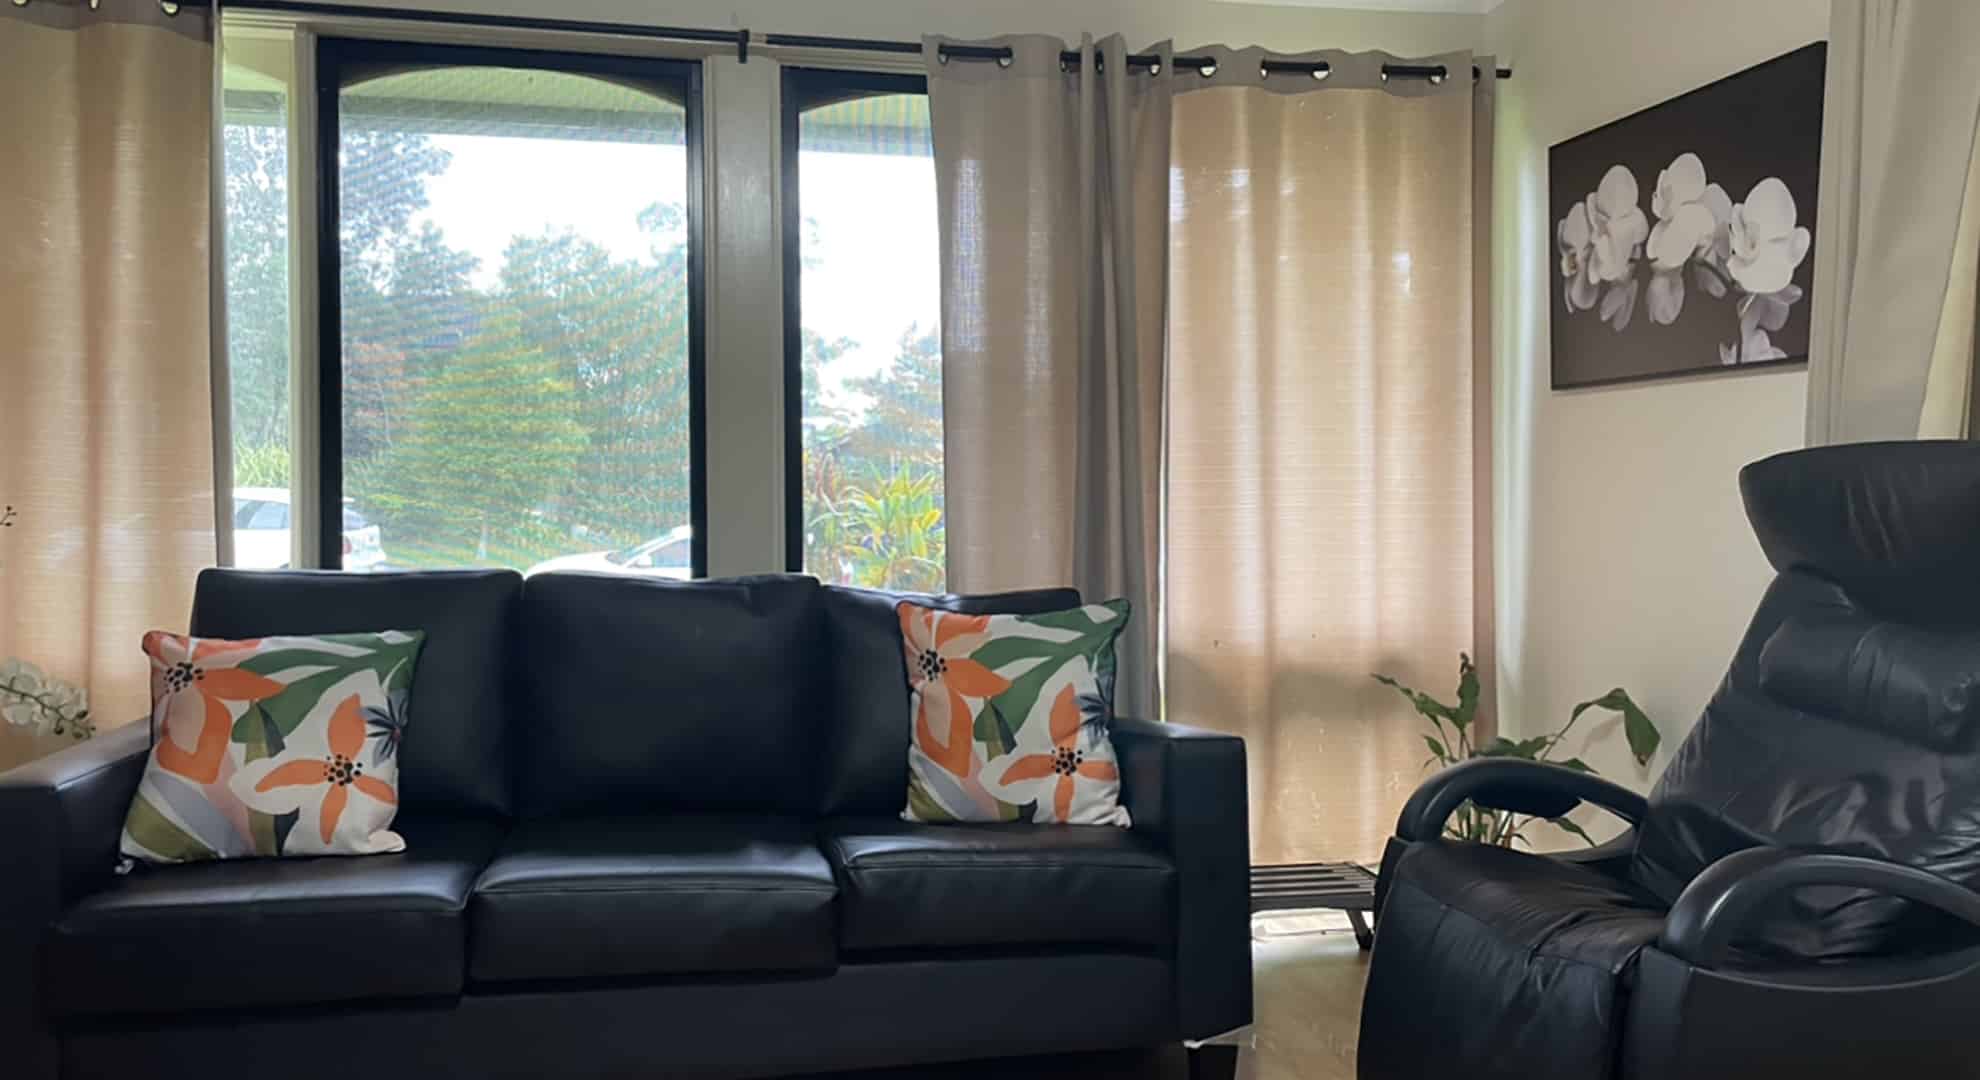 A living room with couches in front of a window.